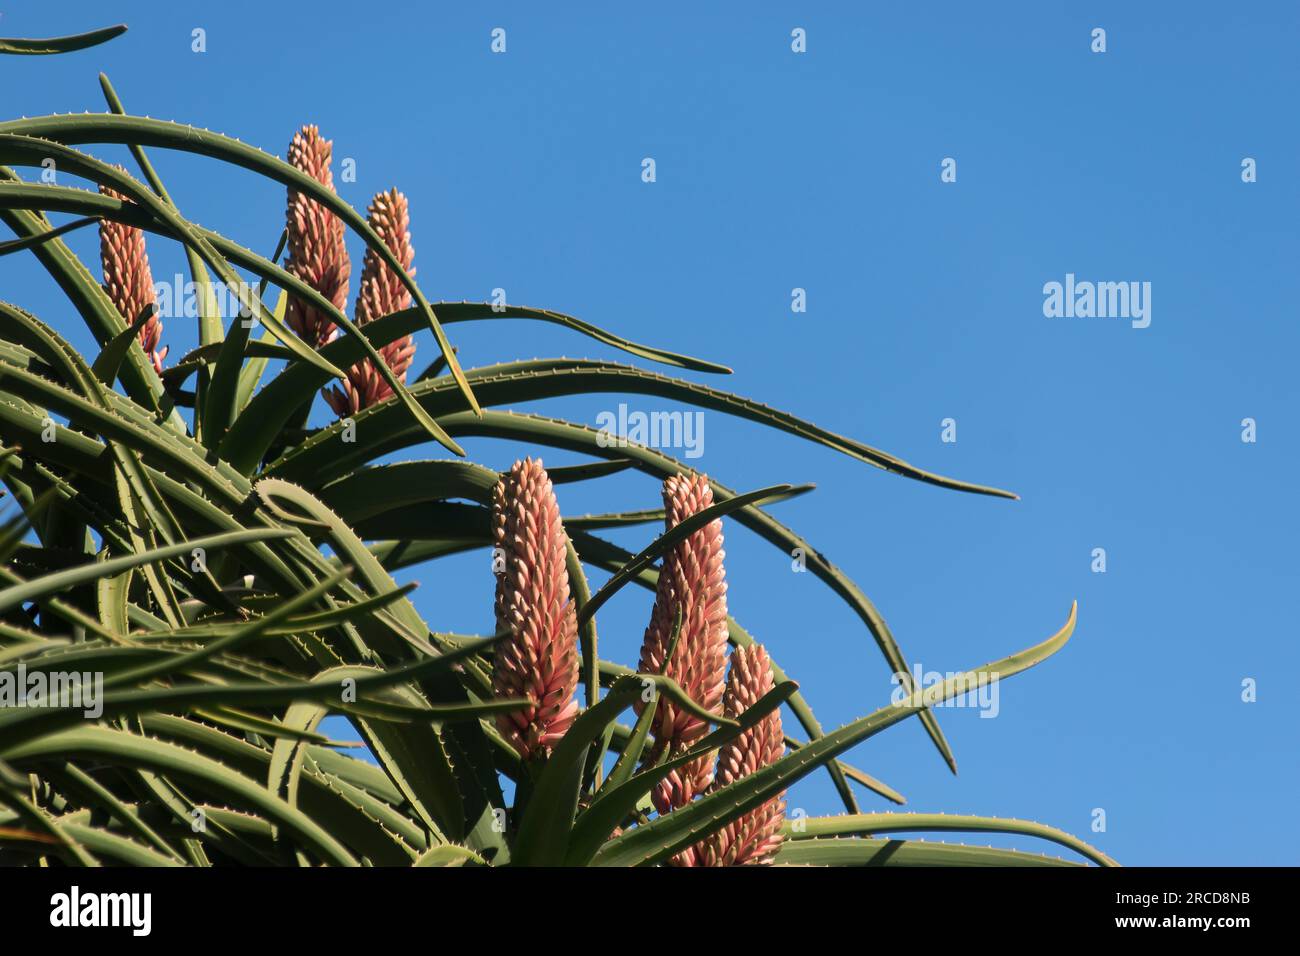 Large salmon pink tubular flowers of Aloe Barberae, tree aloe, native to South Africa, growing in sub-tropical Australian garden in Queensland. Winter Stock Photo